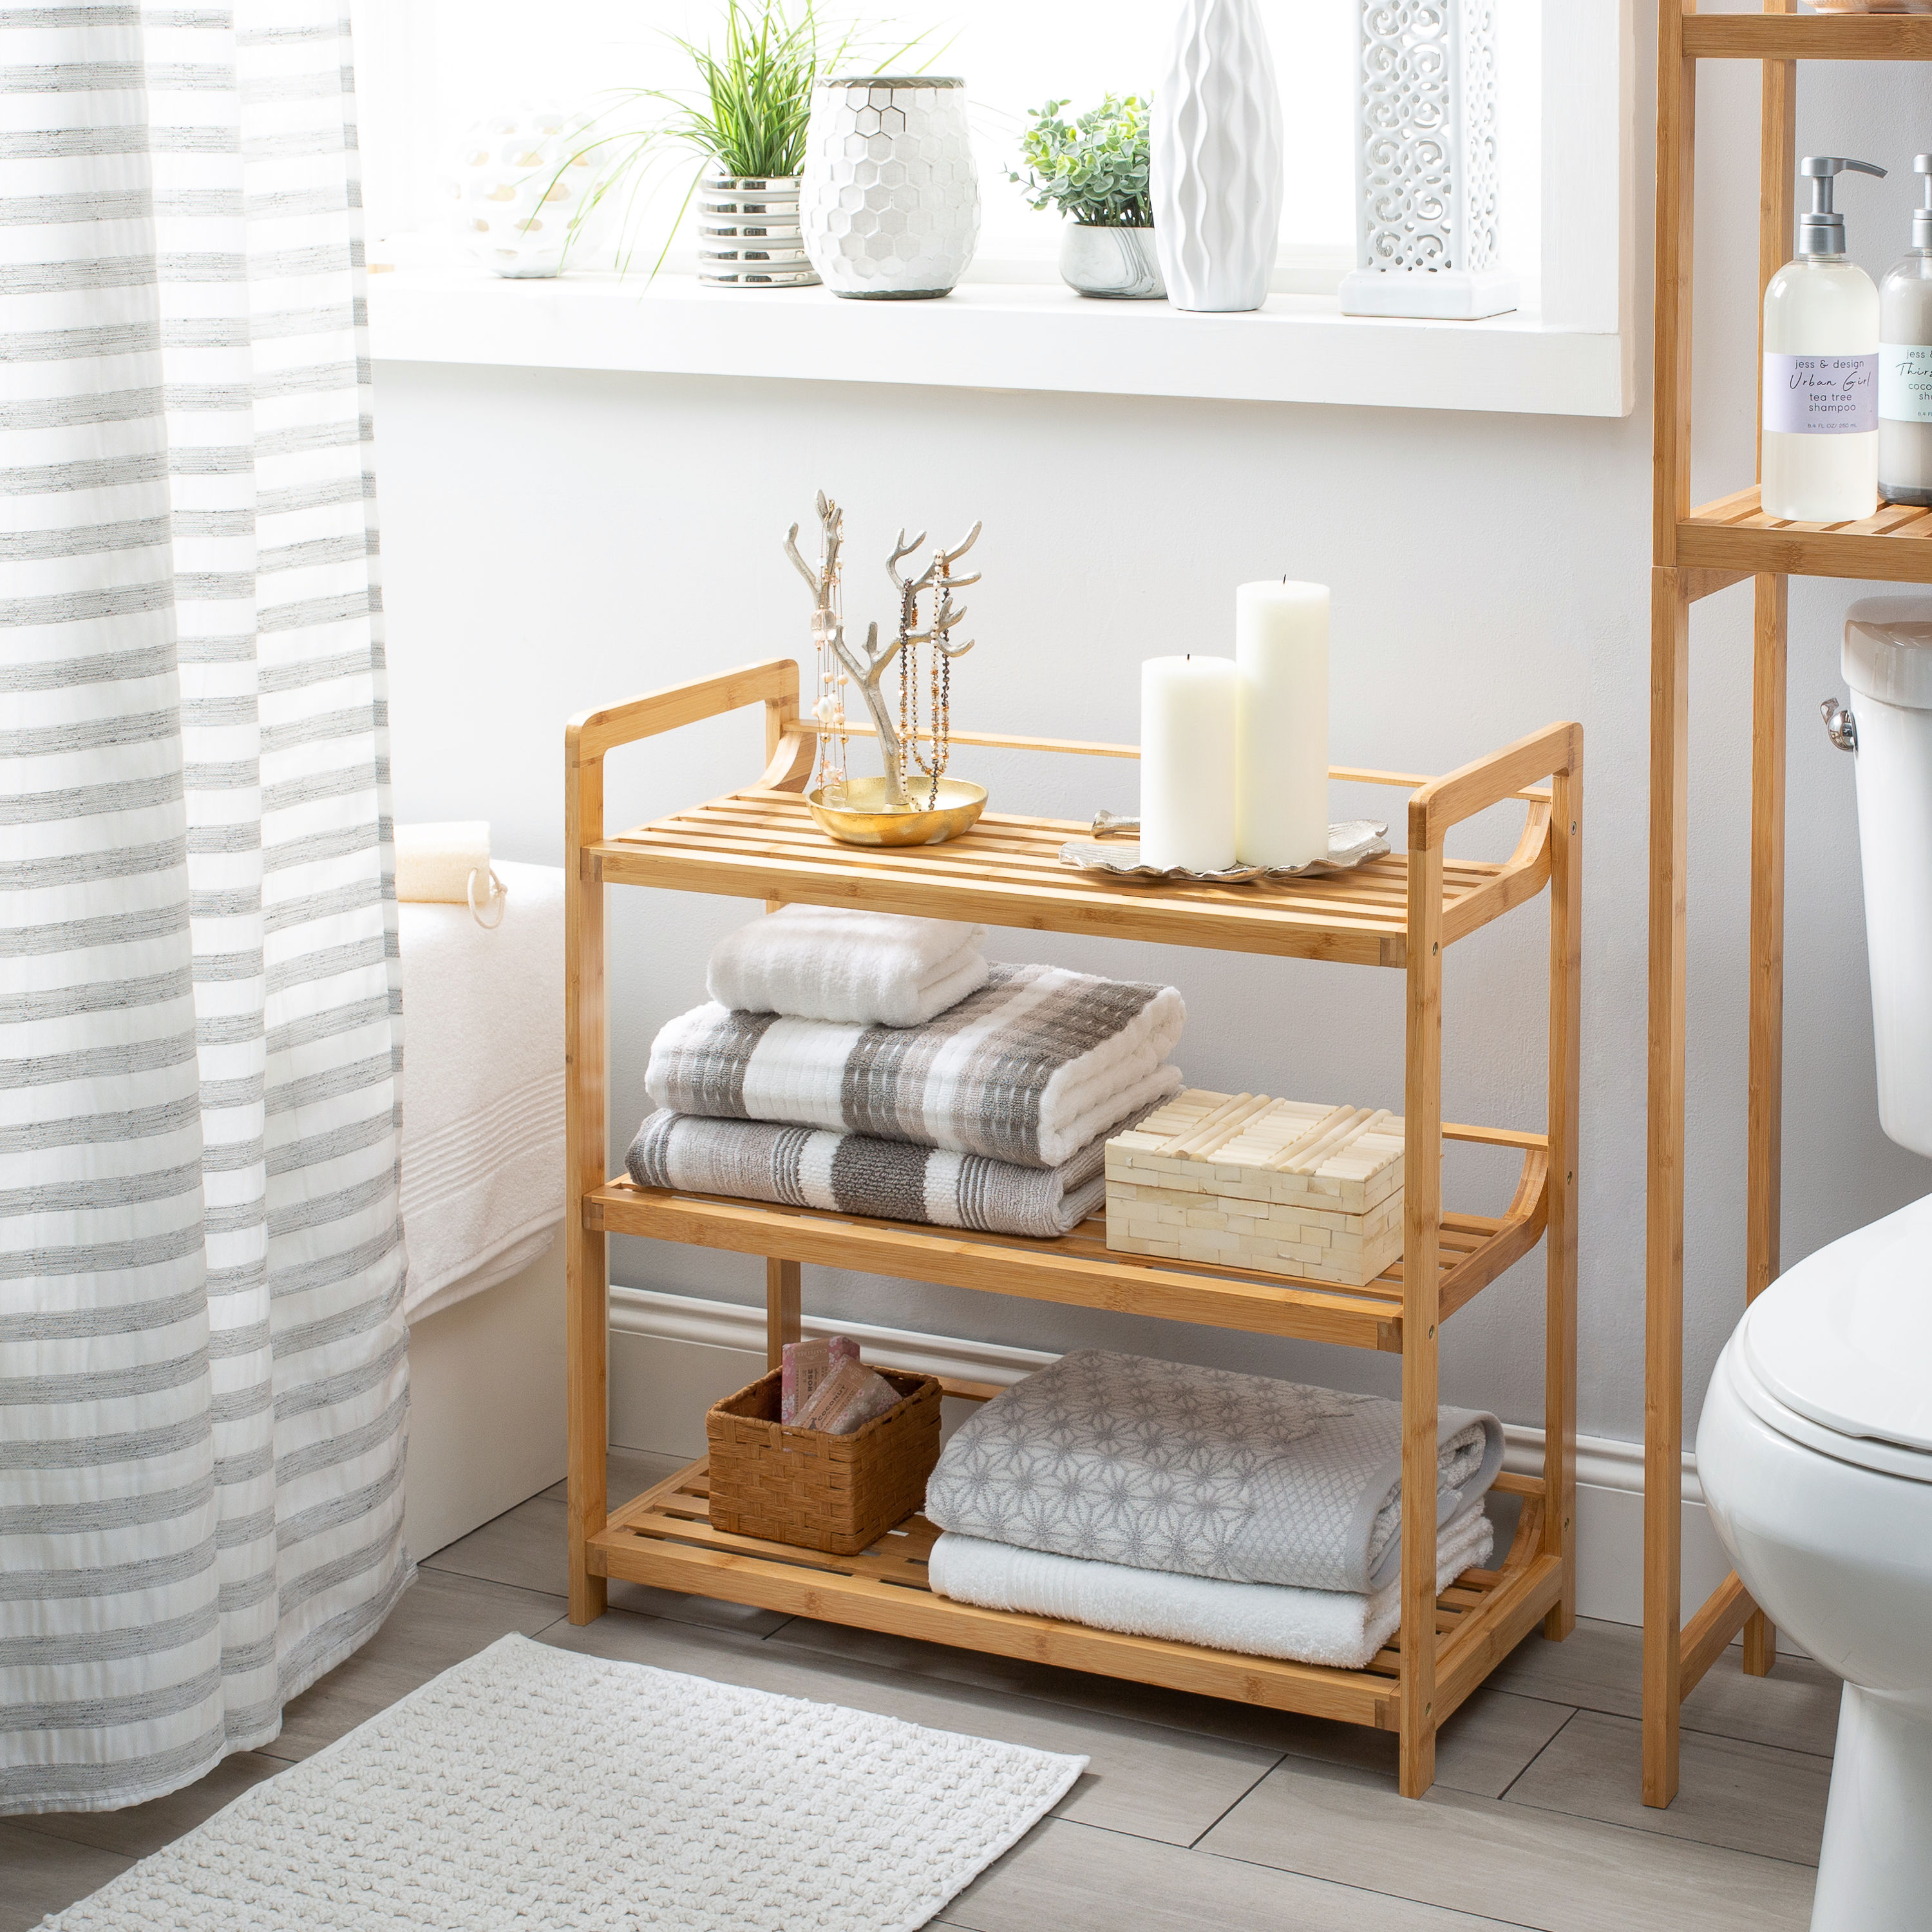 Bamboo Bathroom Shelves Organizer Shelves for Storage Black Adjustable 3  Tiers Floating Shelf Over The Toilet Storage with Hanging Rod